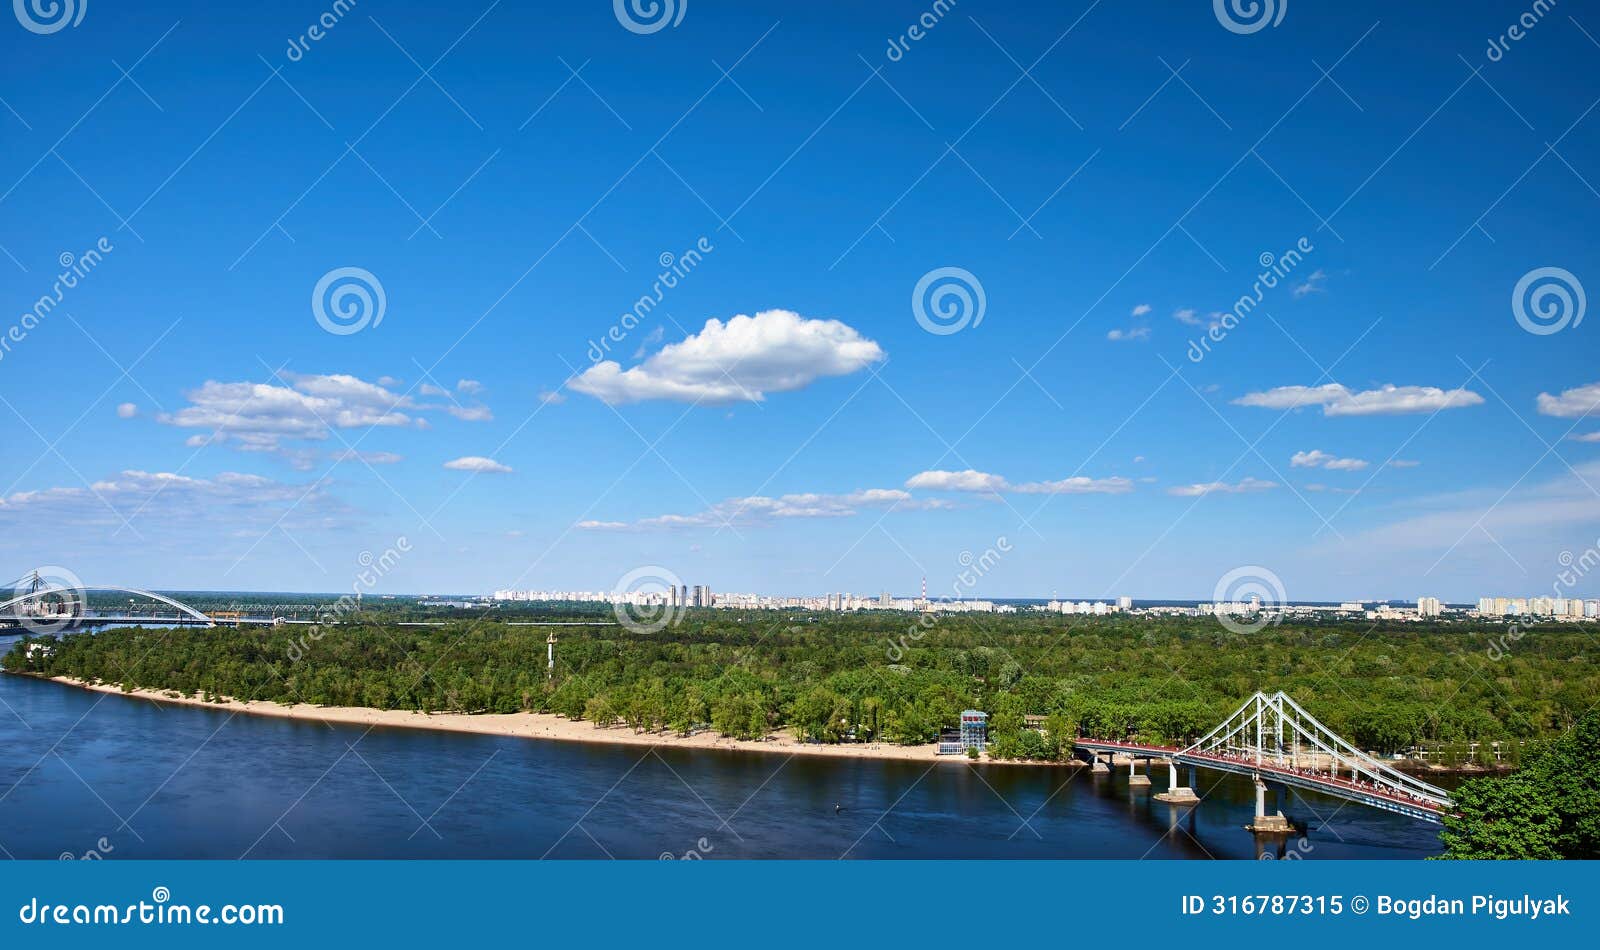 panoramic view of the dnipro river.